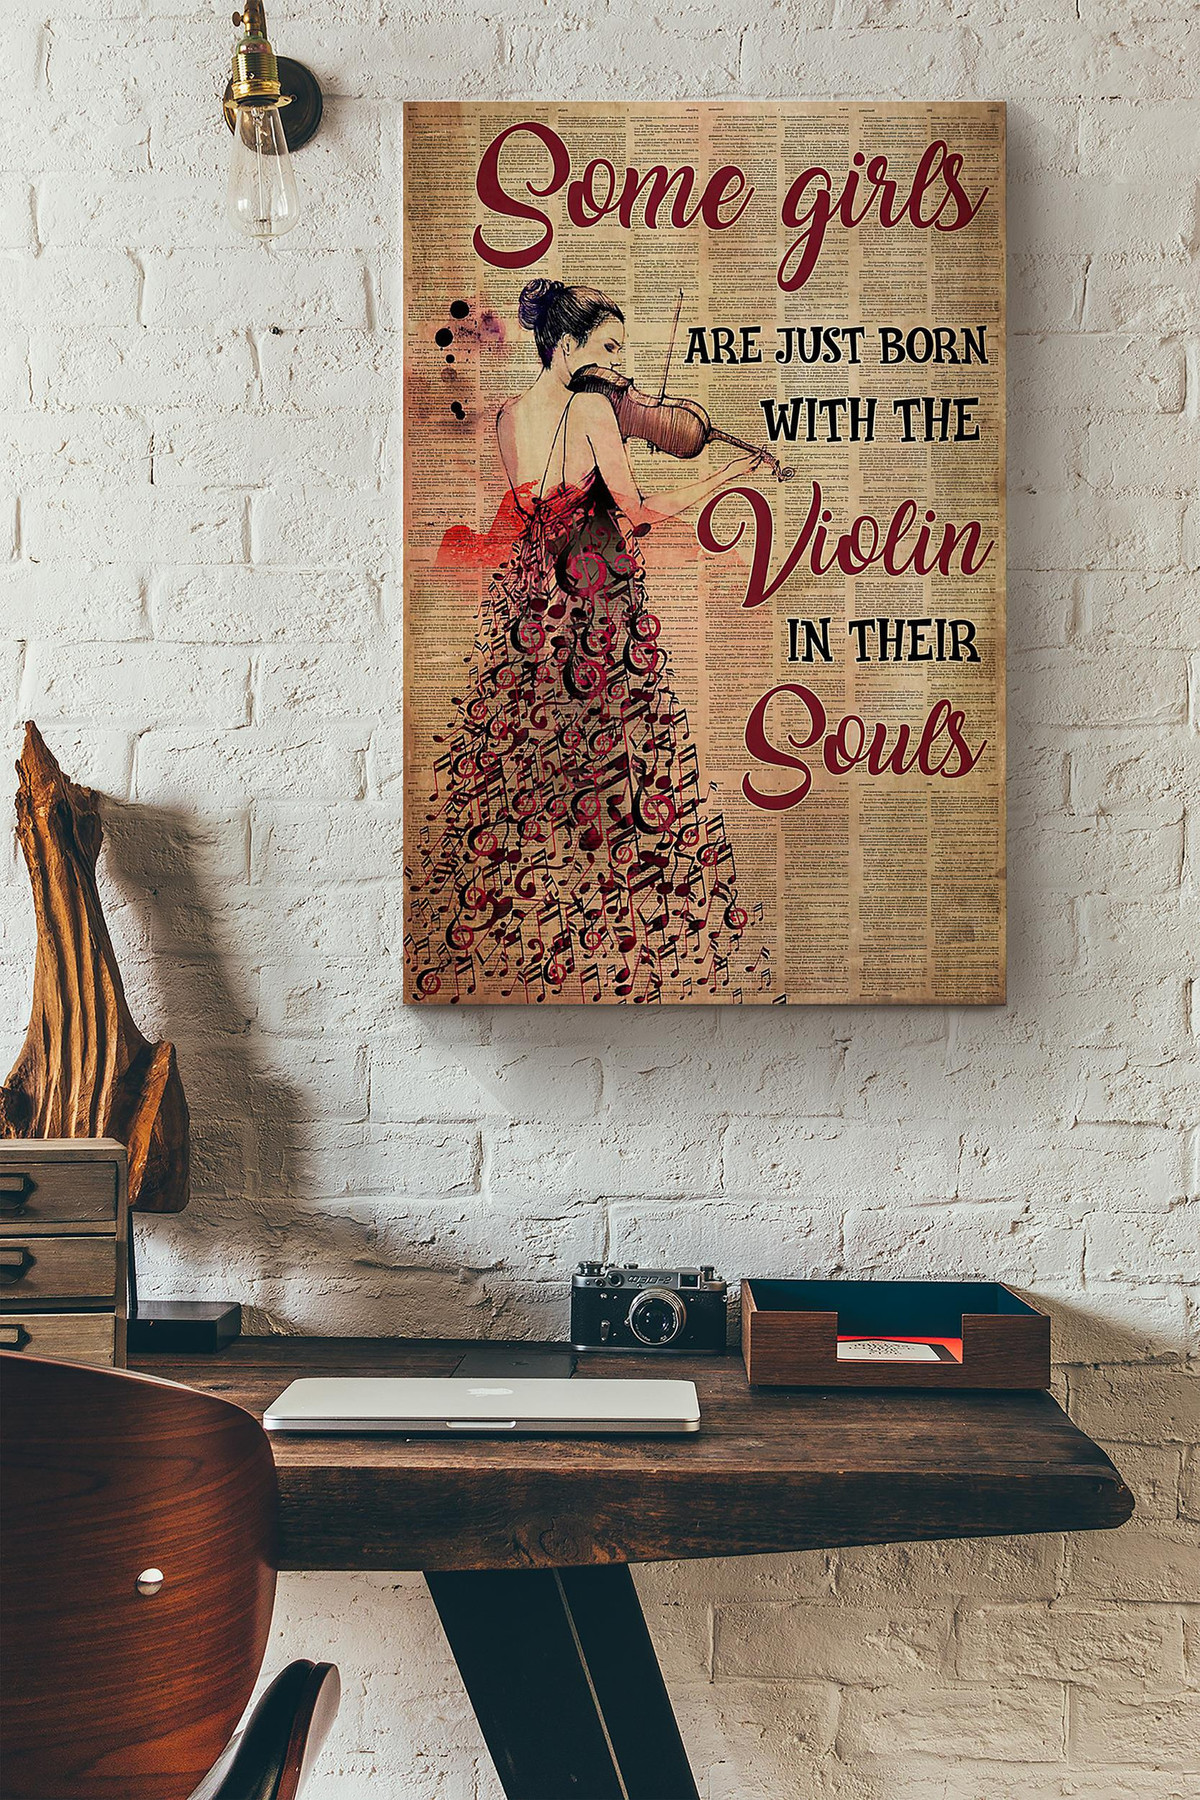 Some Girls Are Just Born With The Violin In Their Souls Canvas Painting Ideas, Canvas Hanging Prints, Gift Idea Framed Prints, Canvas Paintings Wrapped Canvas 8x10